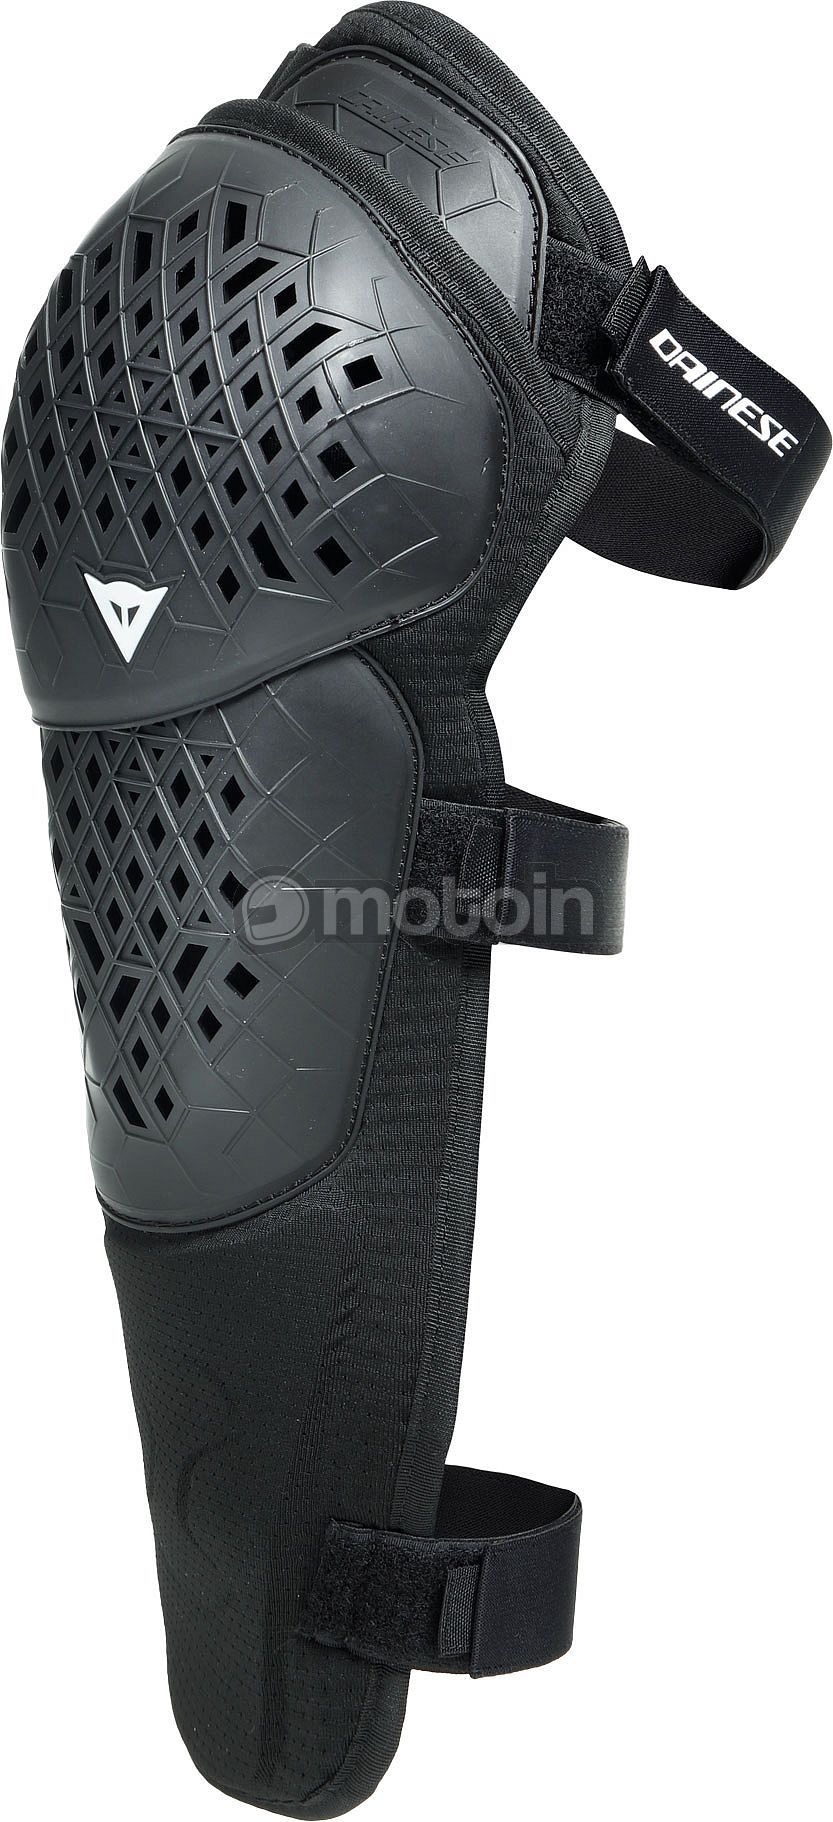 Dainese Rival R, knee protectors